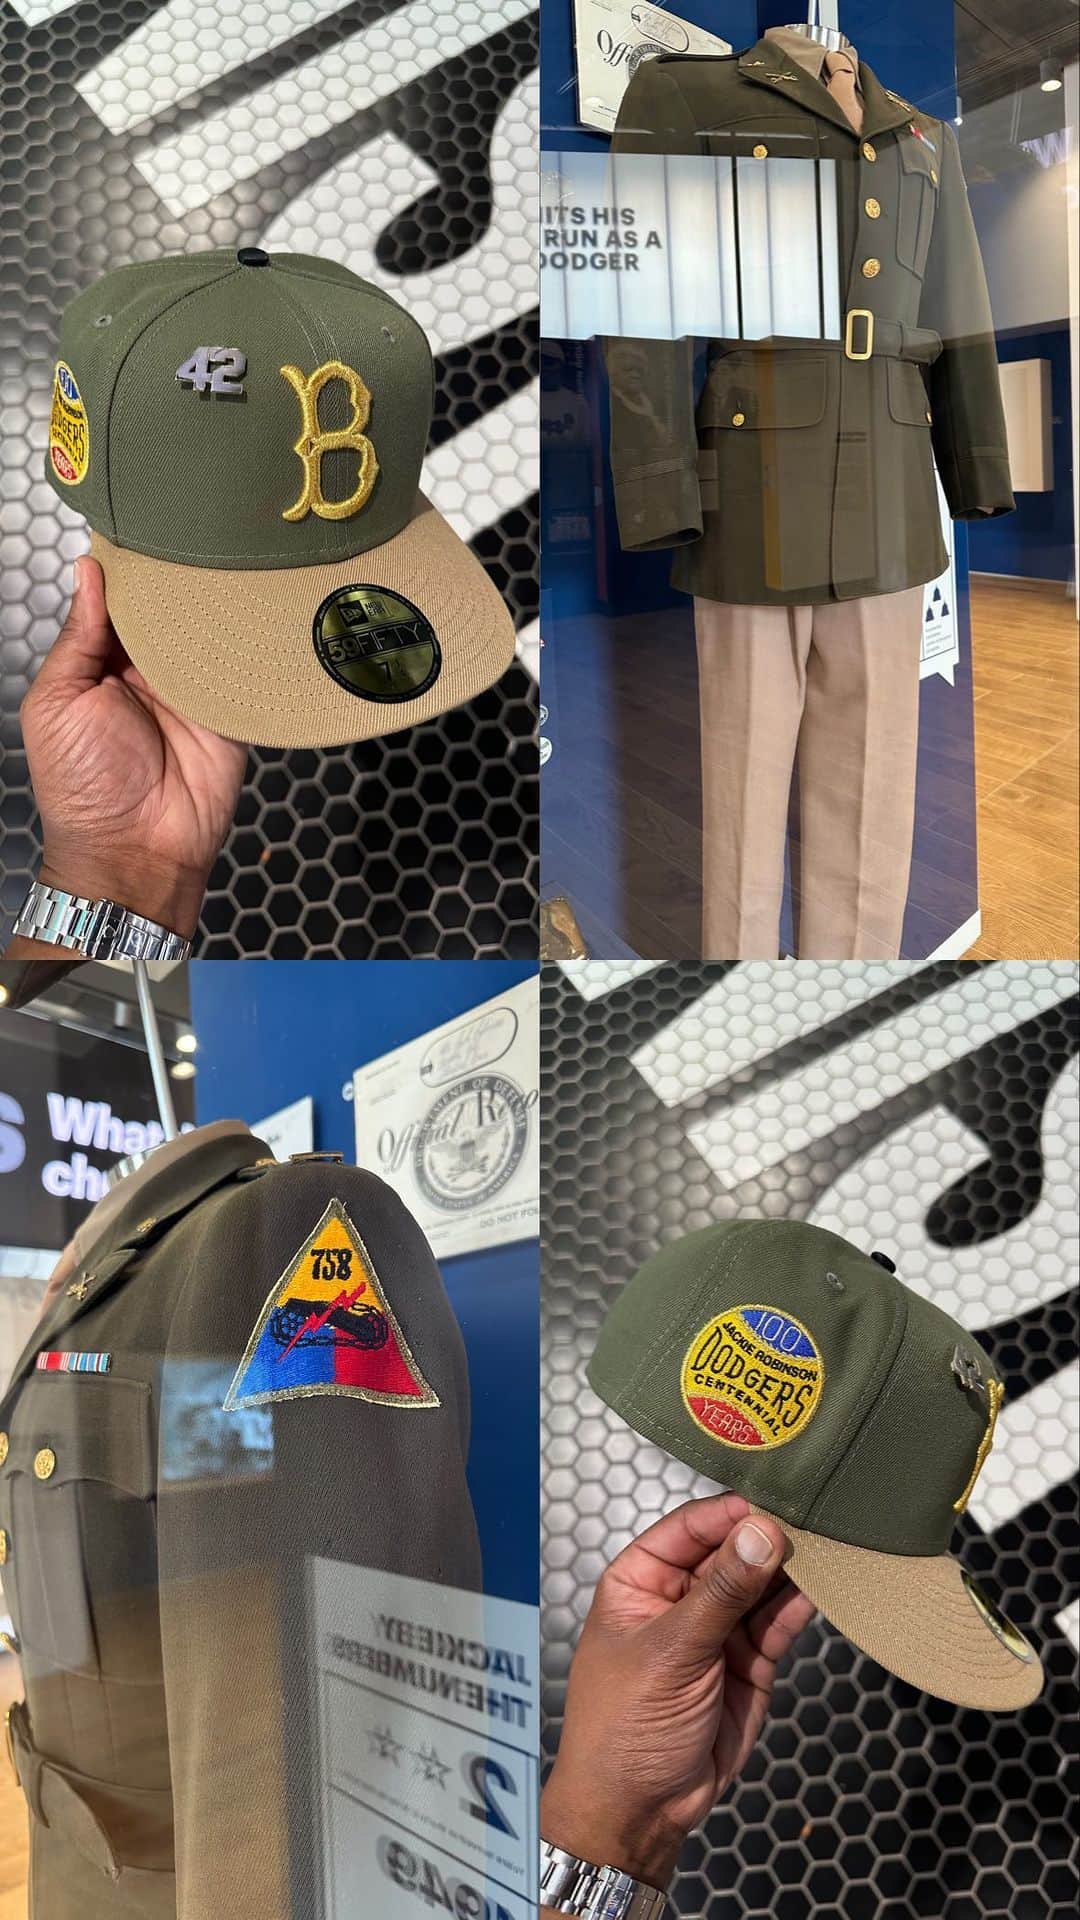 Mr. Tyのインスタグラム：「Popped into the Jackie Robinson Museum back in July and left with some inspo. If you haven’t checked it out, I think you should. I took a liking to Mr. Robinsons uniform as you can see! Coming soon!  #capson #fittedfiend #teamfitted #thatfittedmean #stayfitted #59fifty #igfittedcommunity #fittednation #neweracap #newera #neweracaptalk #flyyourownflag #wearyourallegiance #stayfitted #fittedfam #5950」